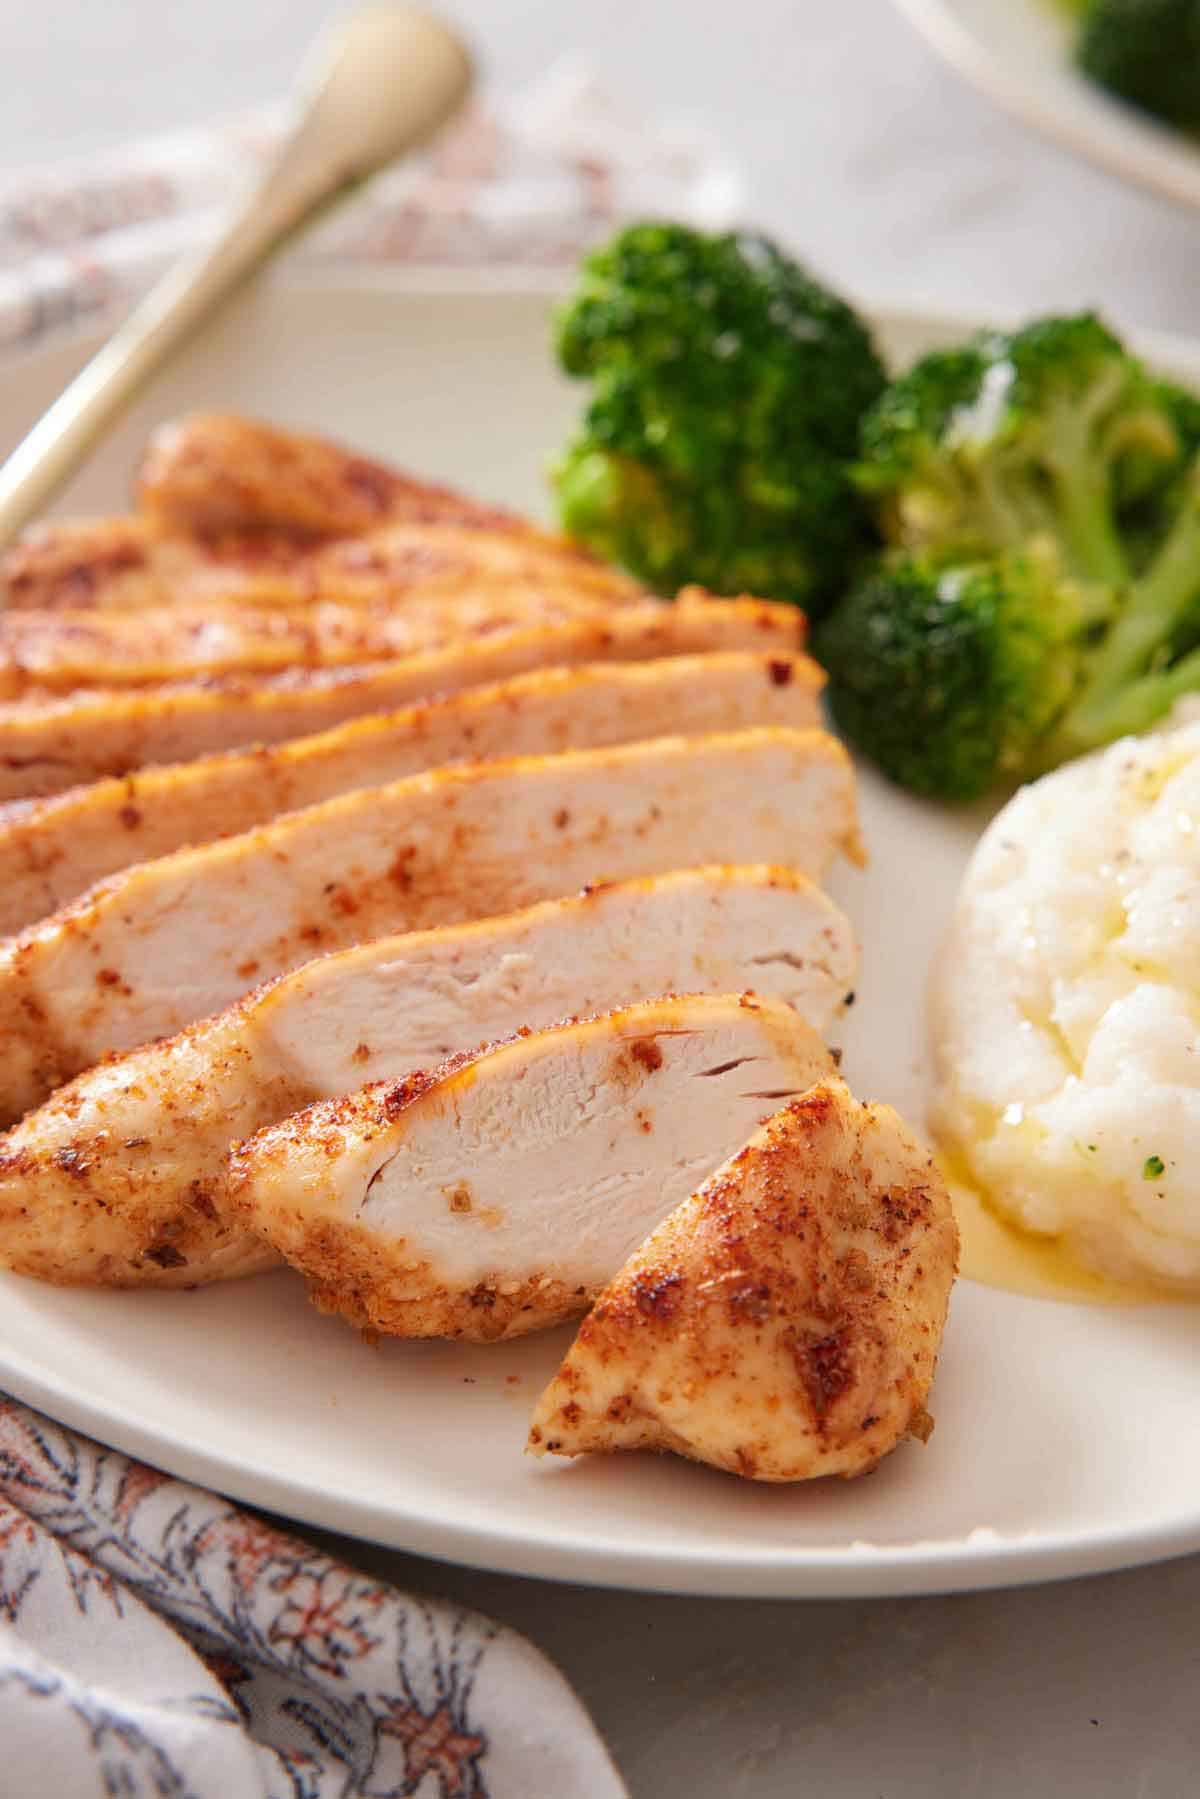 A close up of sliced air fryer chicken breast on a plate with some mashed potatoes and broccoli on the side.